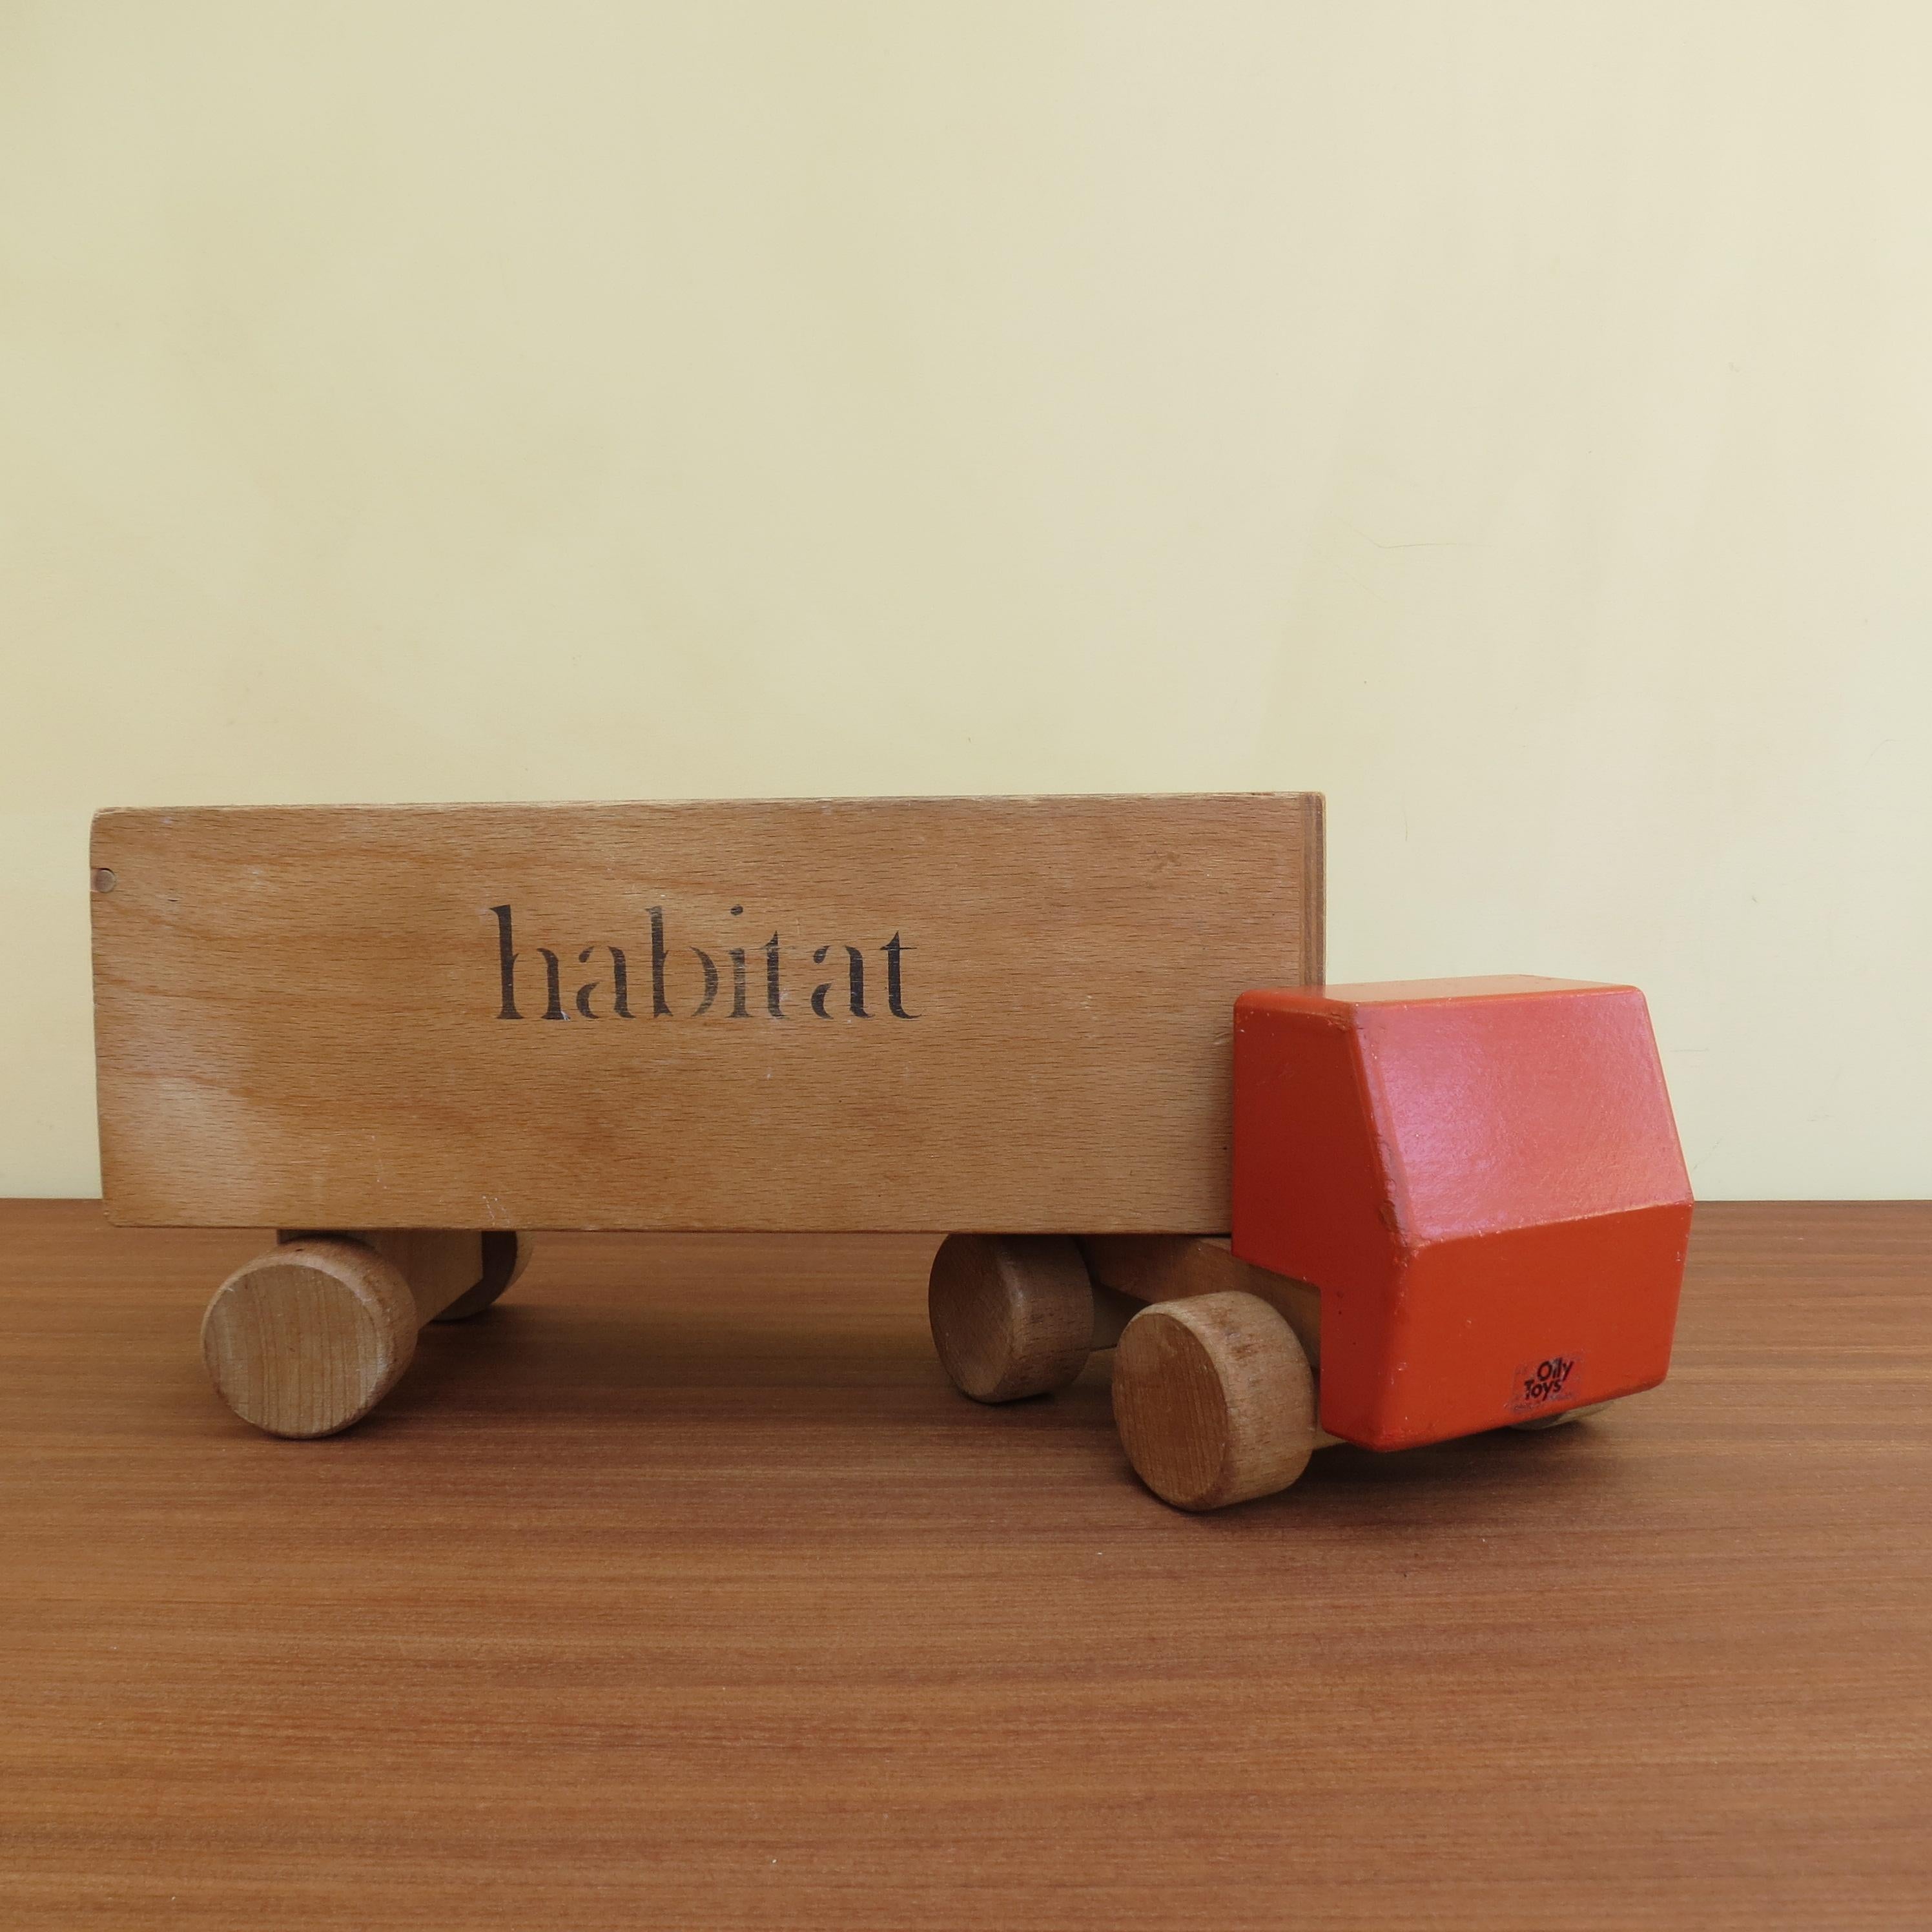 1970s Vintage Advertising Toy Lorry for Habitat Wooden Toy Lorry by Ryk Heuff 1